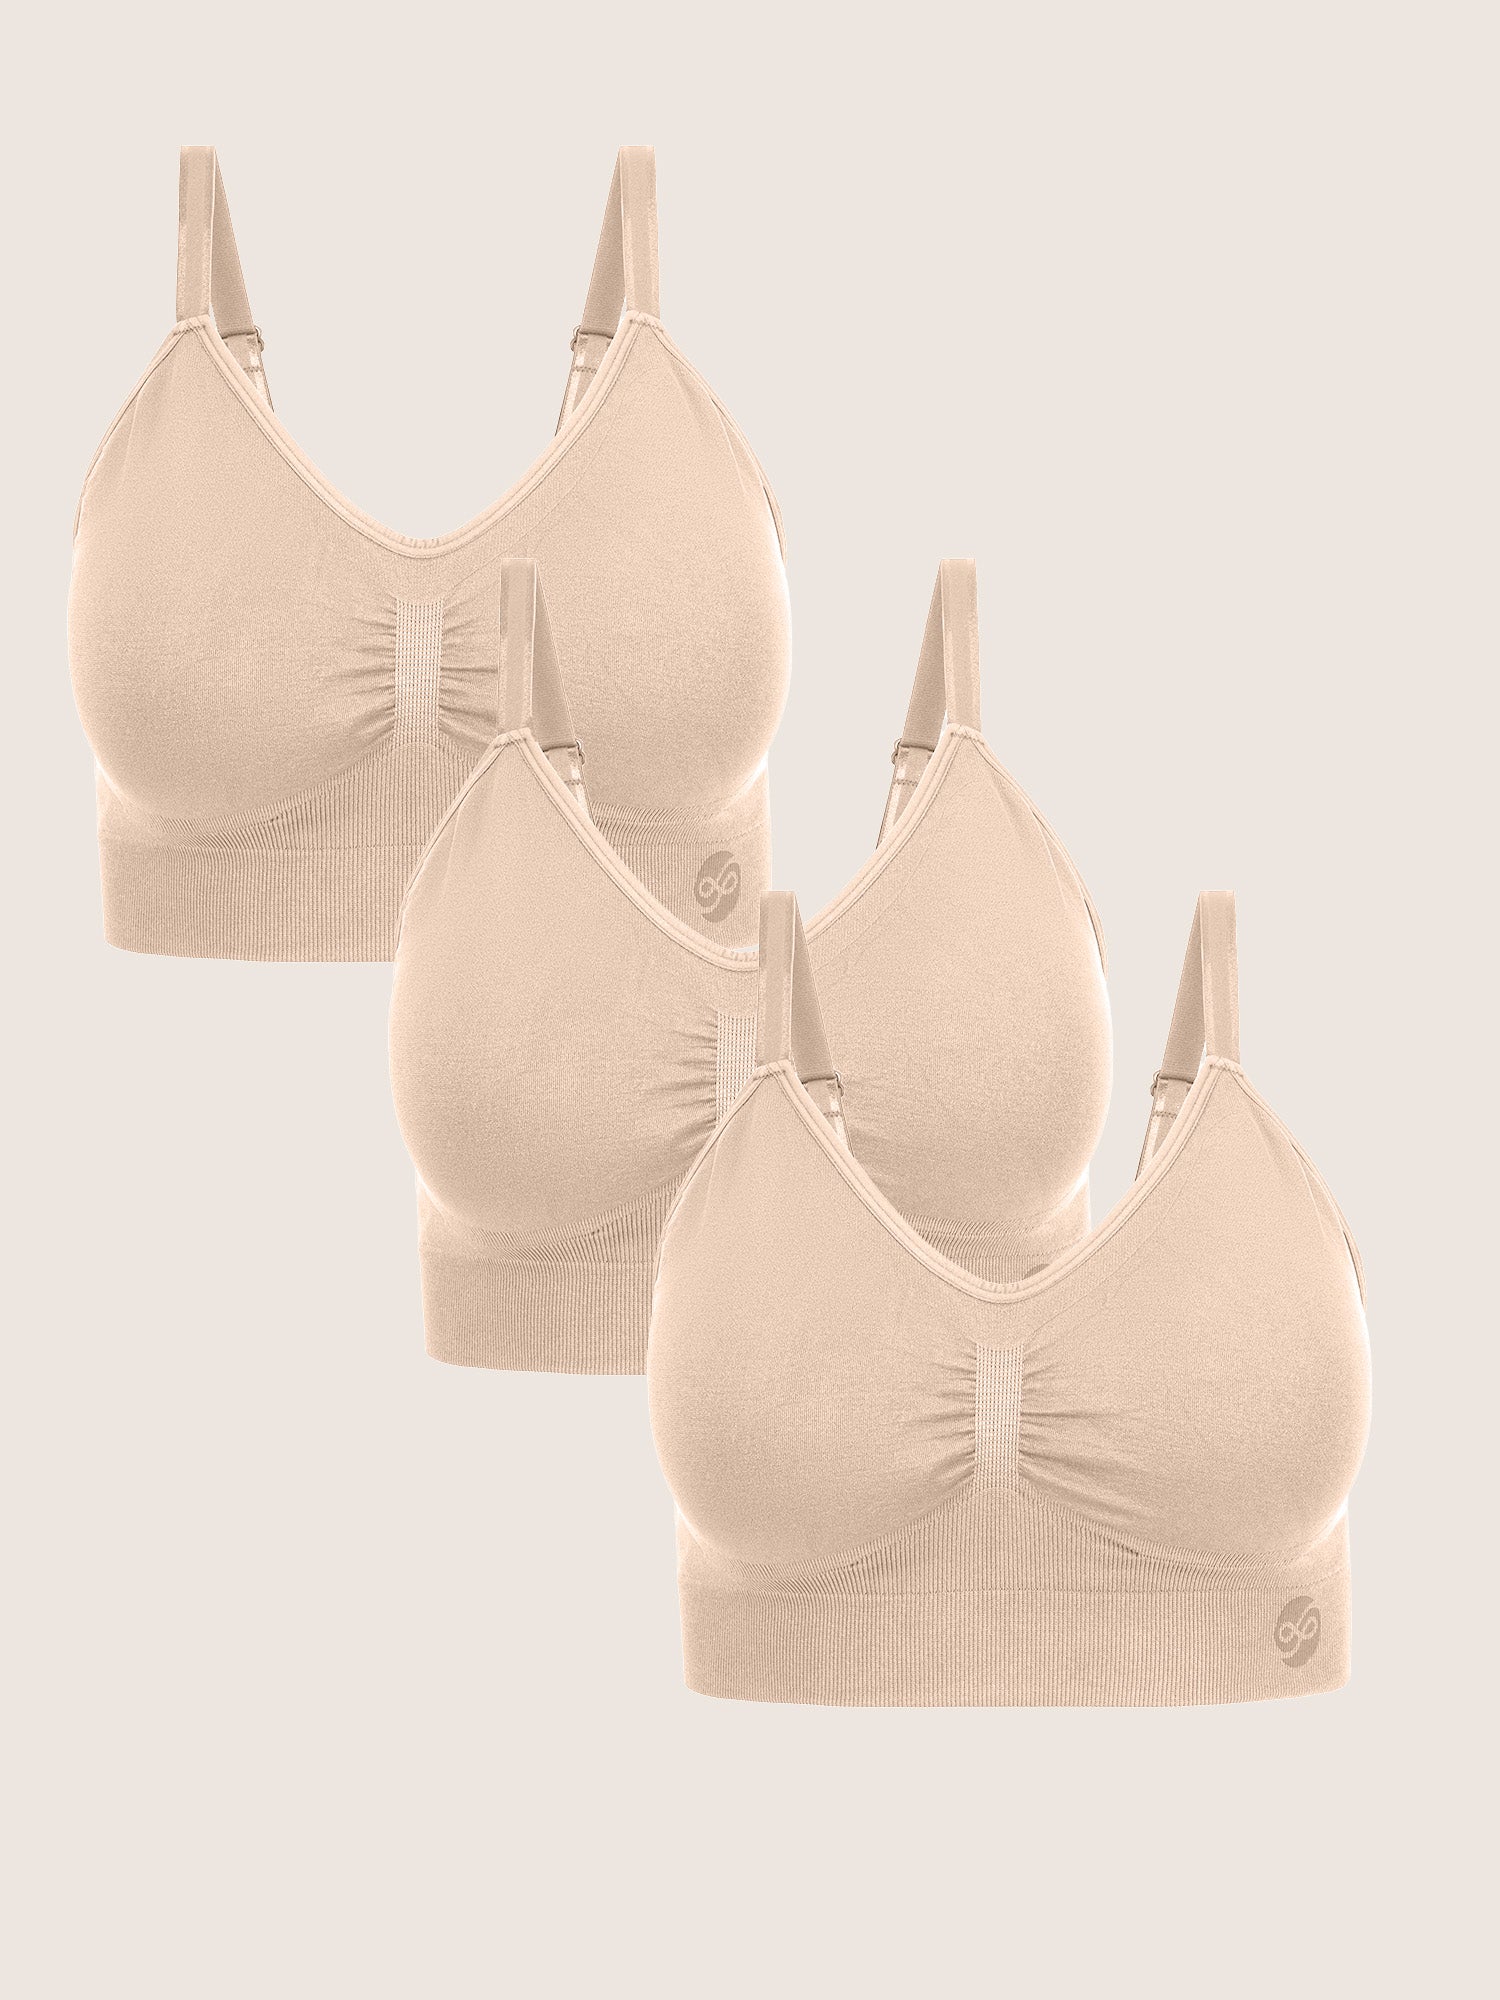 More of Me to Love Three-Hook Bra Extender 3-Pack - Black, White, Beige :  : Clothing, Shoes & Accessories